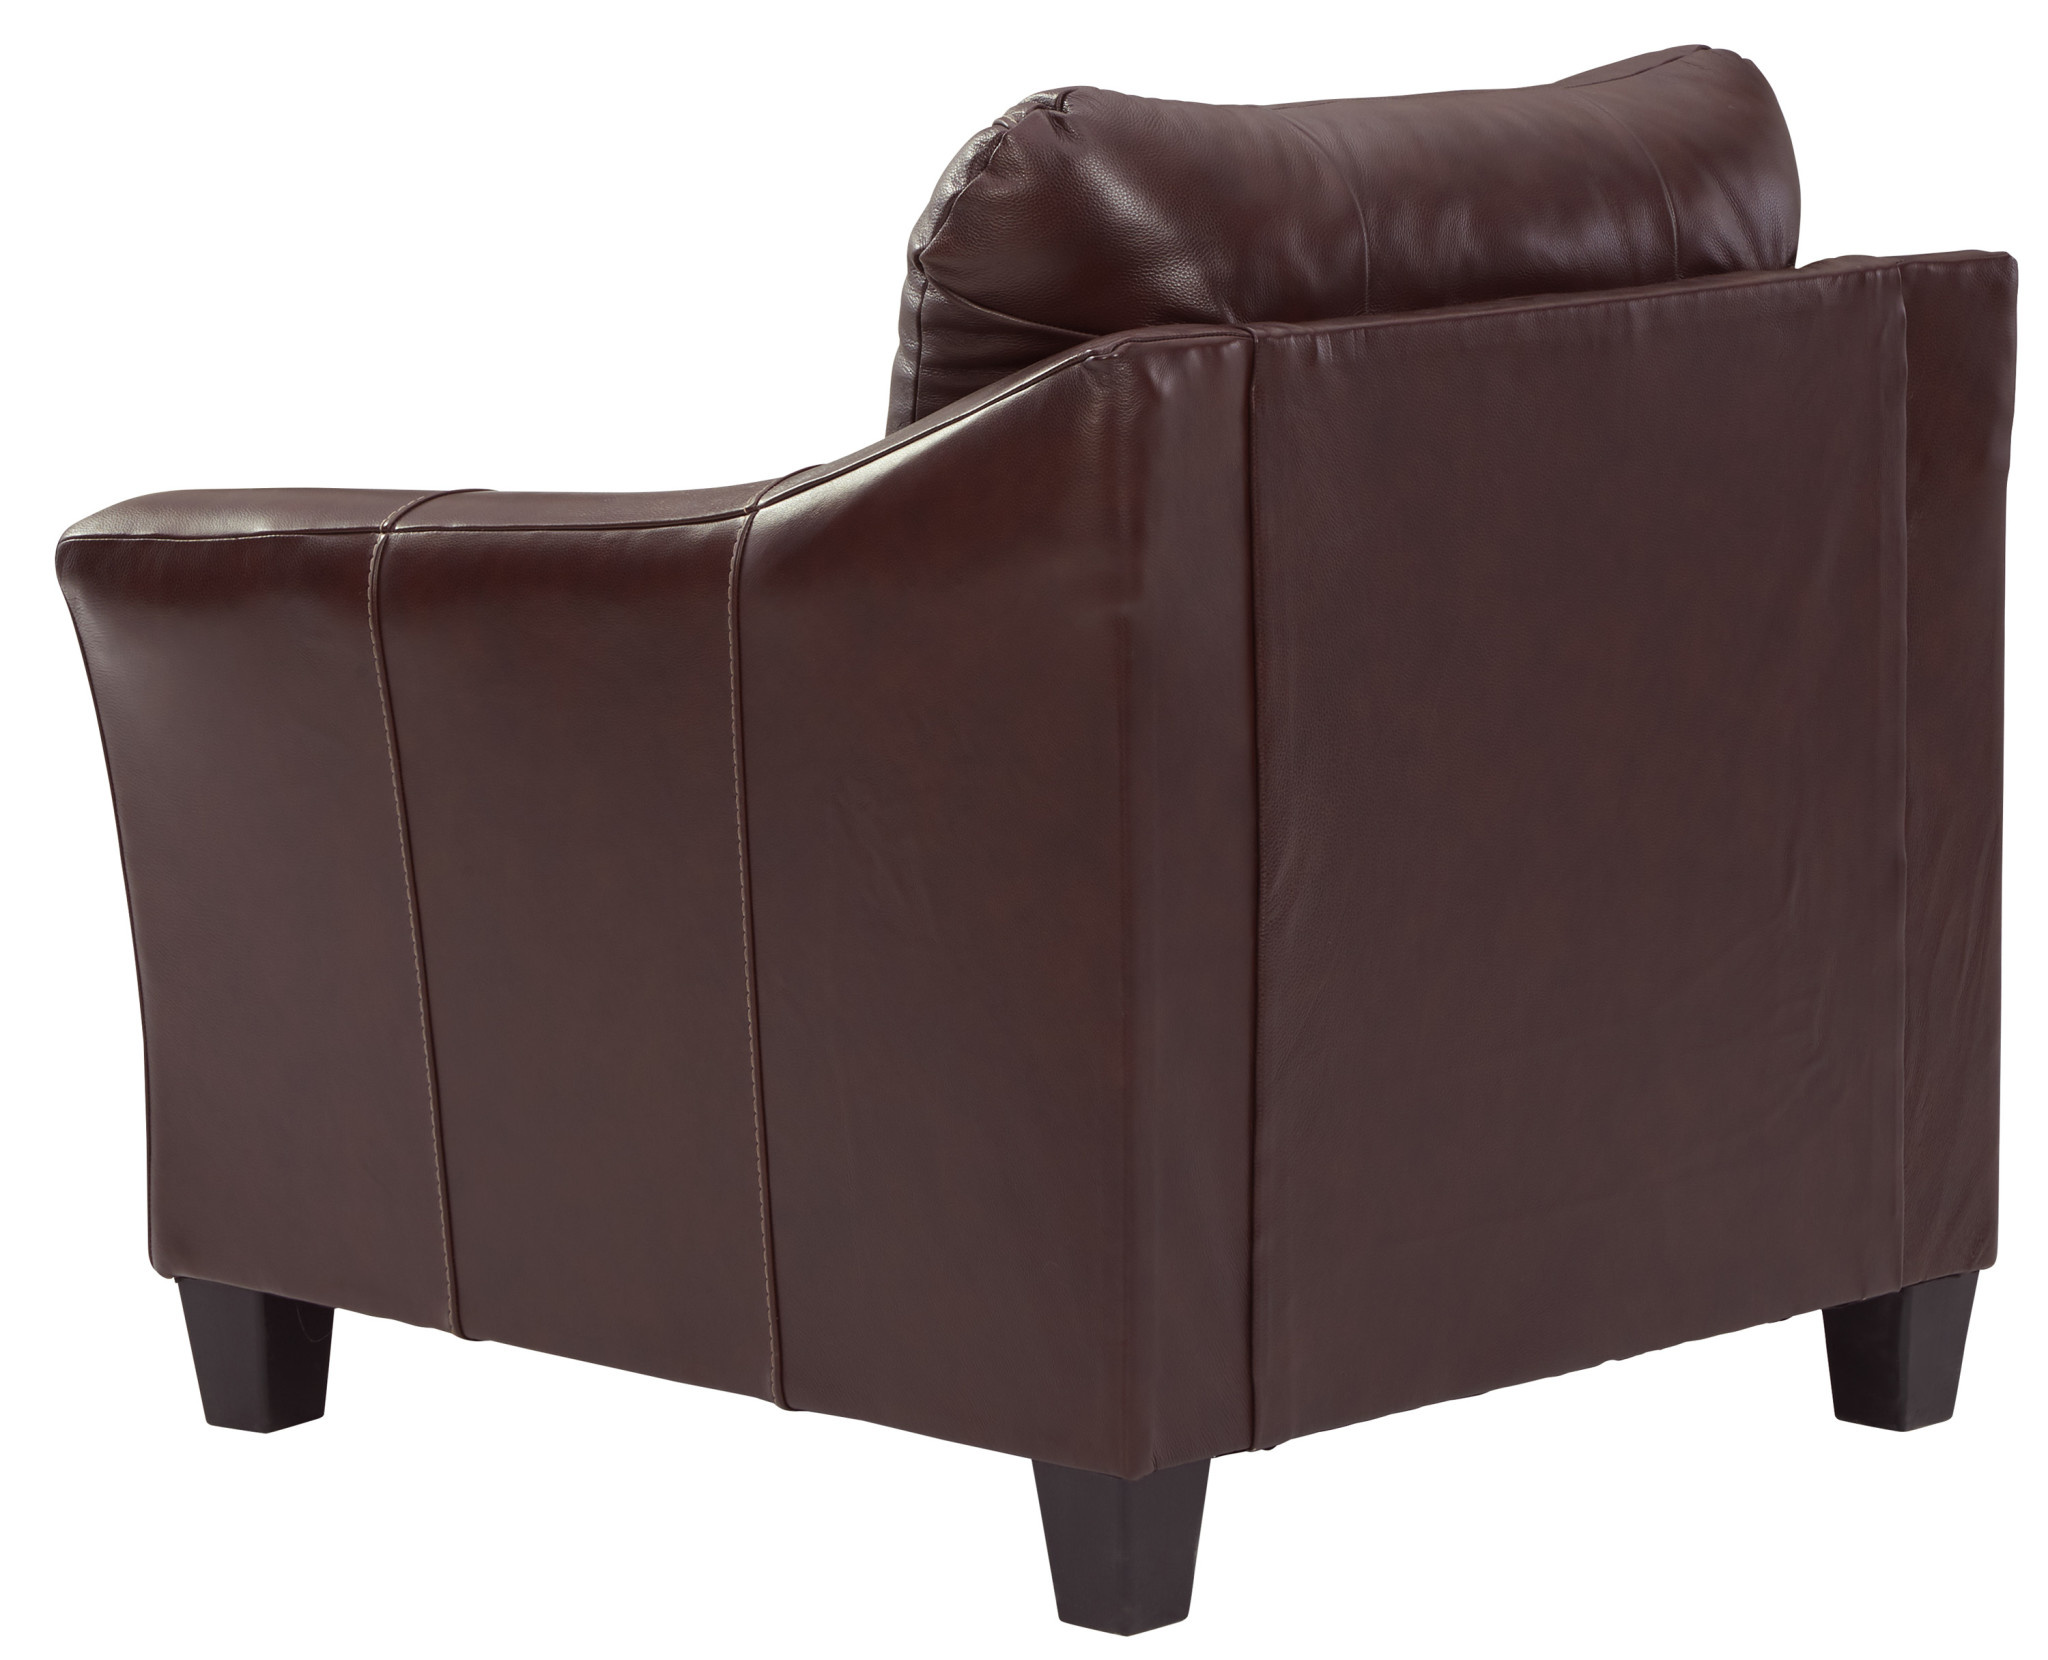 Signature Design Leather Chair- "Fortney"- Mahogany Color- Leather 9240620